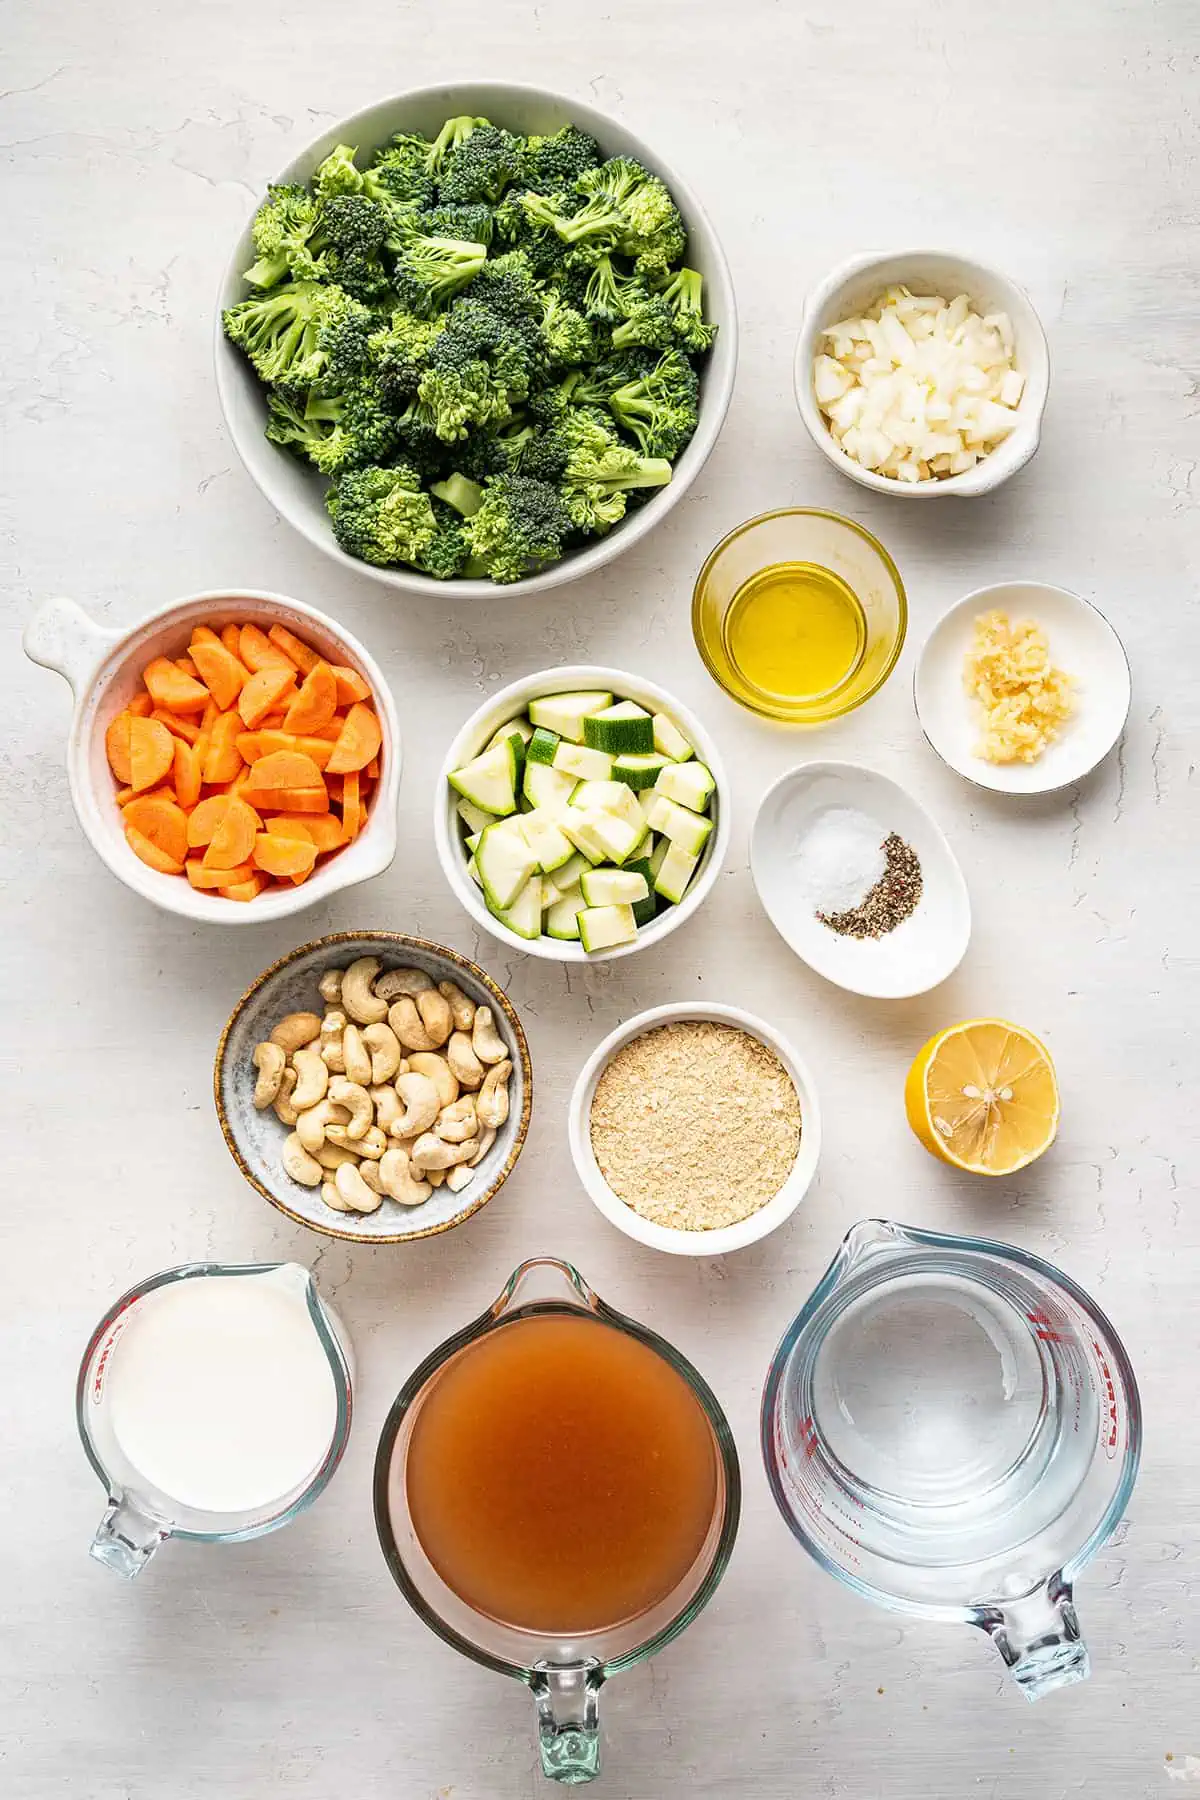 Overhead view of the ingredients needed for vegan cream of broccoli soup: A bowl of broccoli florets, a bowl of diced carrots, a bowl of diced onions, a bowl of diced zucchini, a bowl of raw cashews, a glass of almond milk, a glass of vegetable broth, a glass of water, a ramekin of salt and pepper, a ramekin of olive oil, a ramekin of chopped garlic, a ramekin of nutritional yeast, and half a lemon